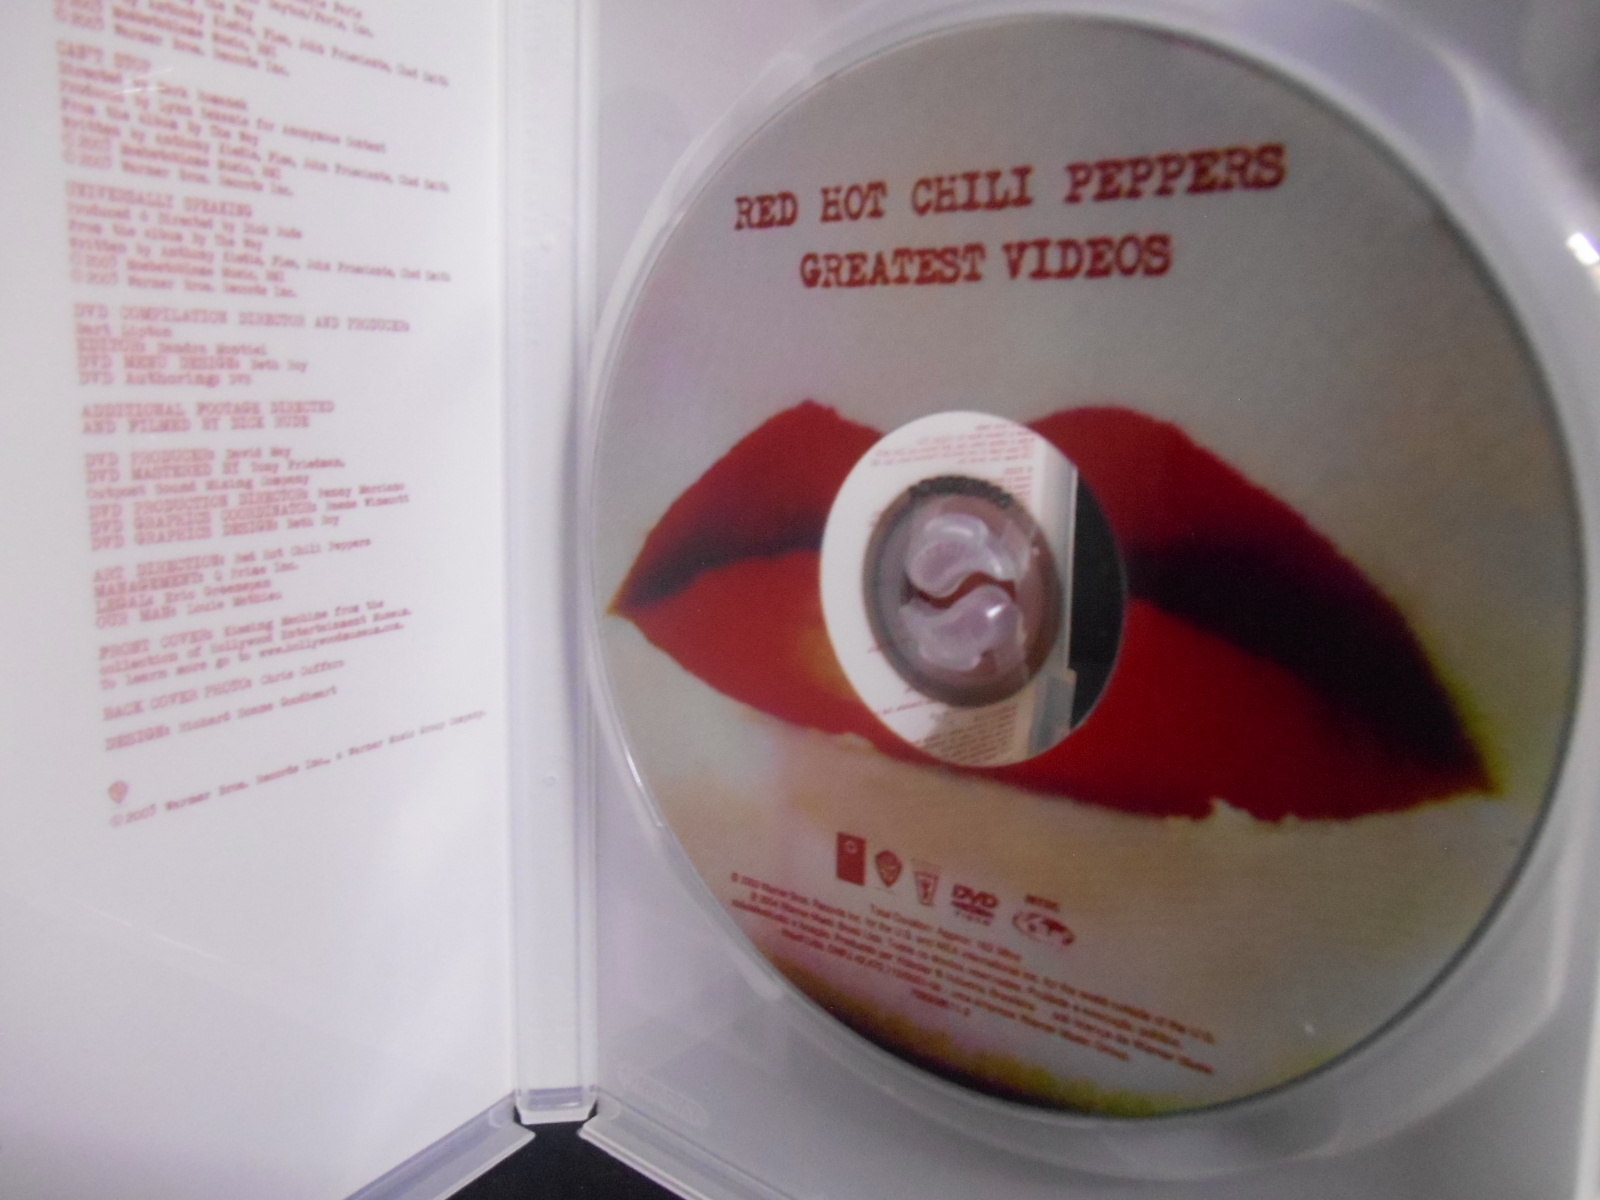 DVD - Red Hot Chili Peppers - Greatest Videos